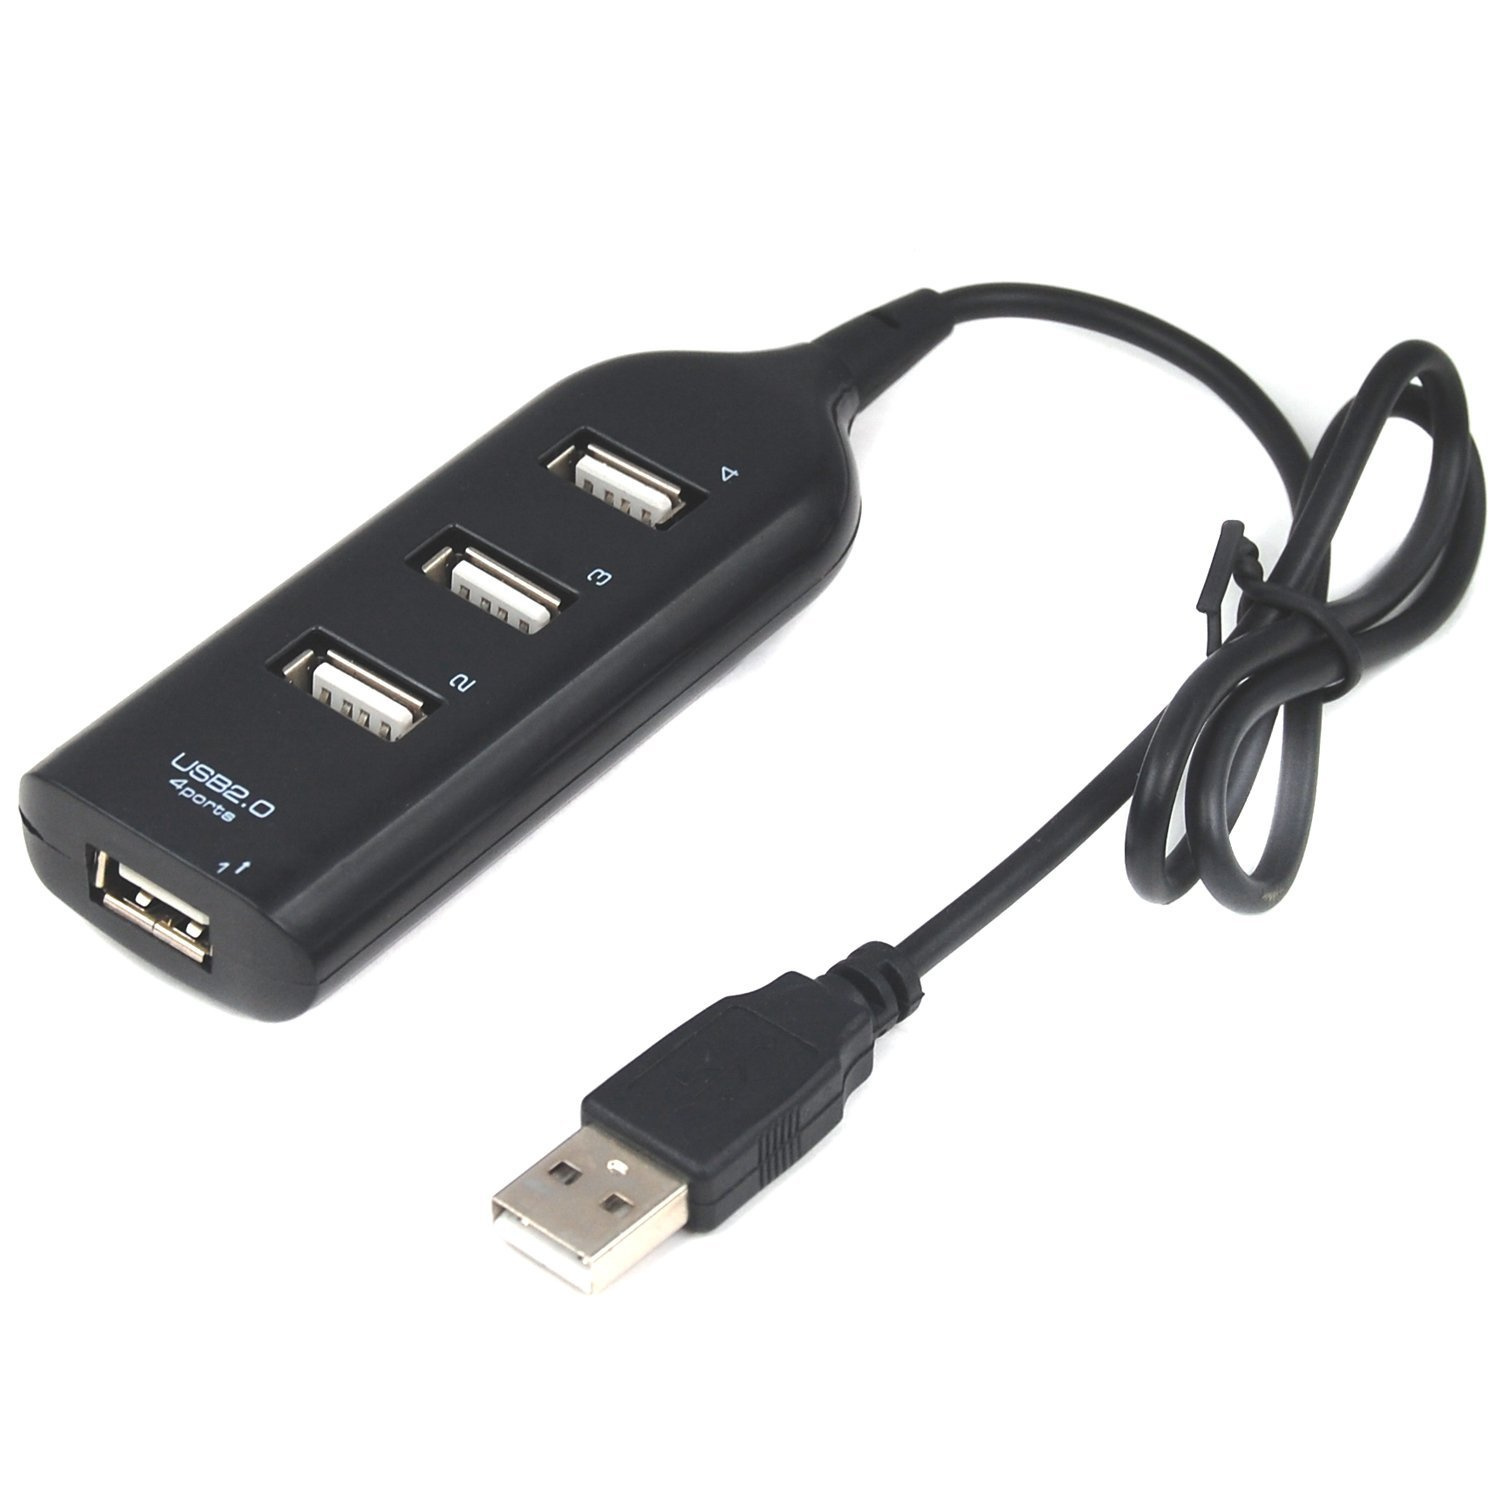 USB Extension Cord - Community - The SitePoint Forums